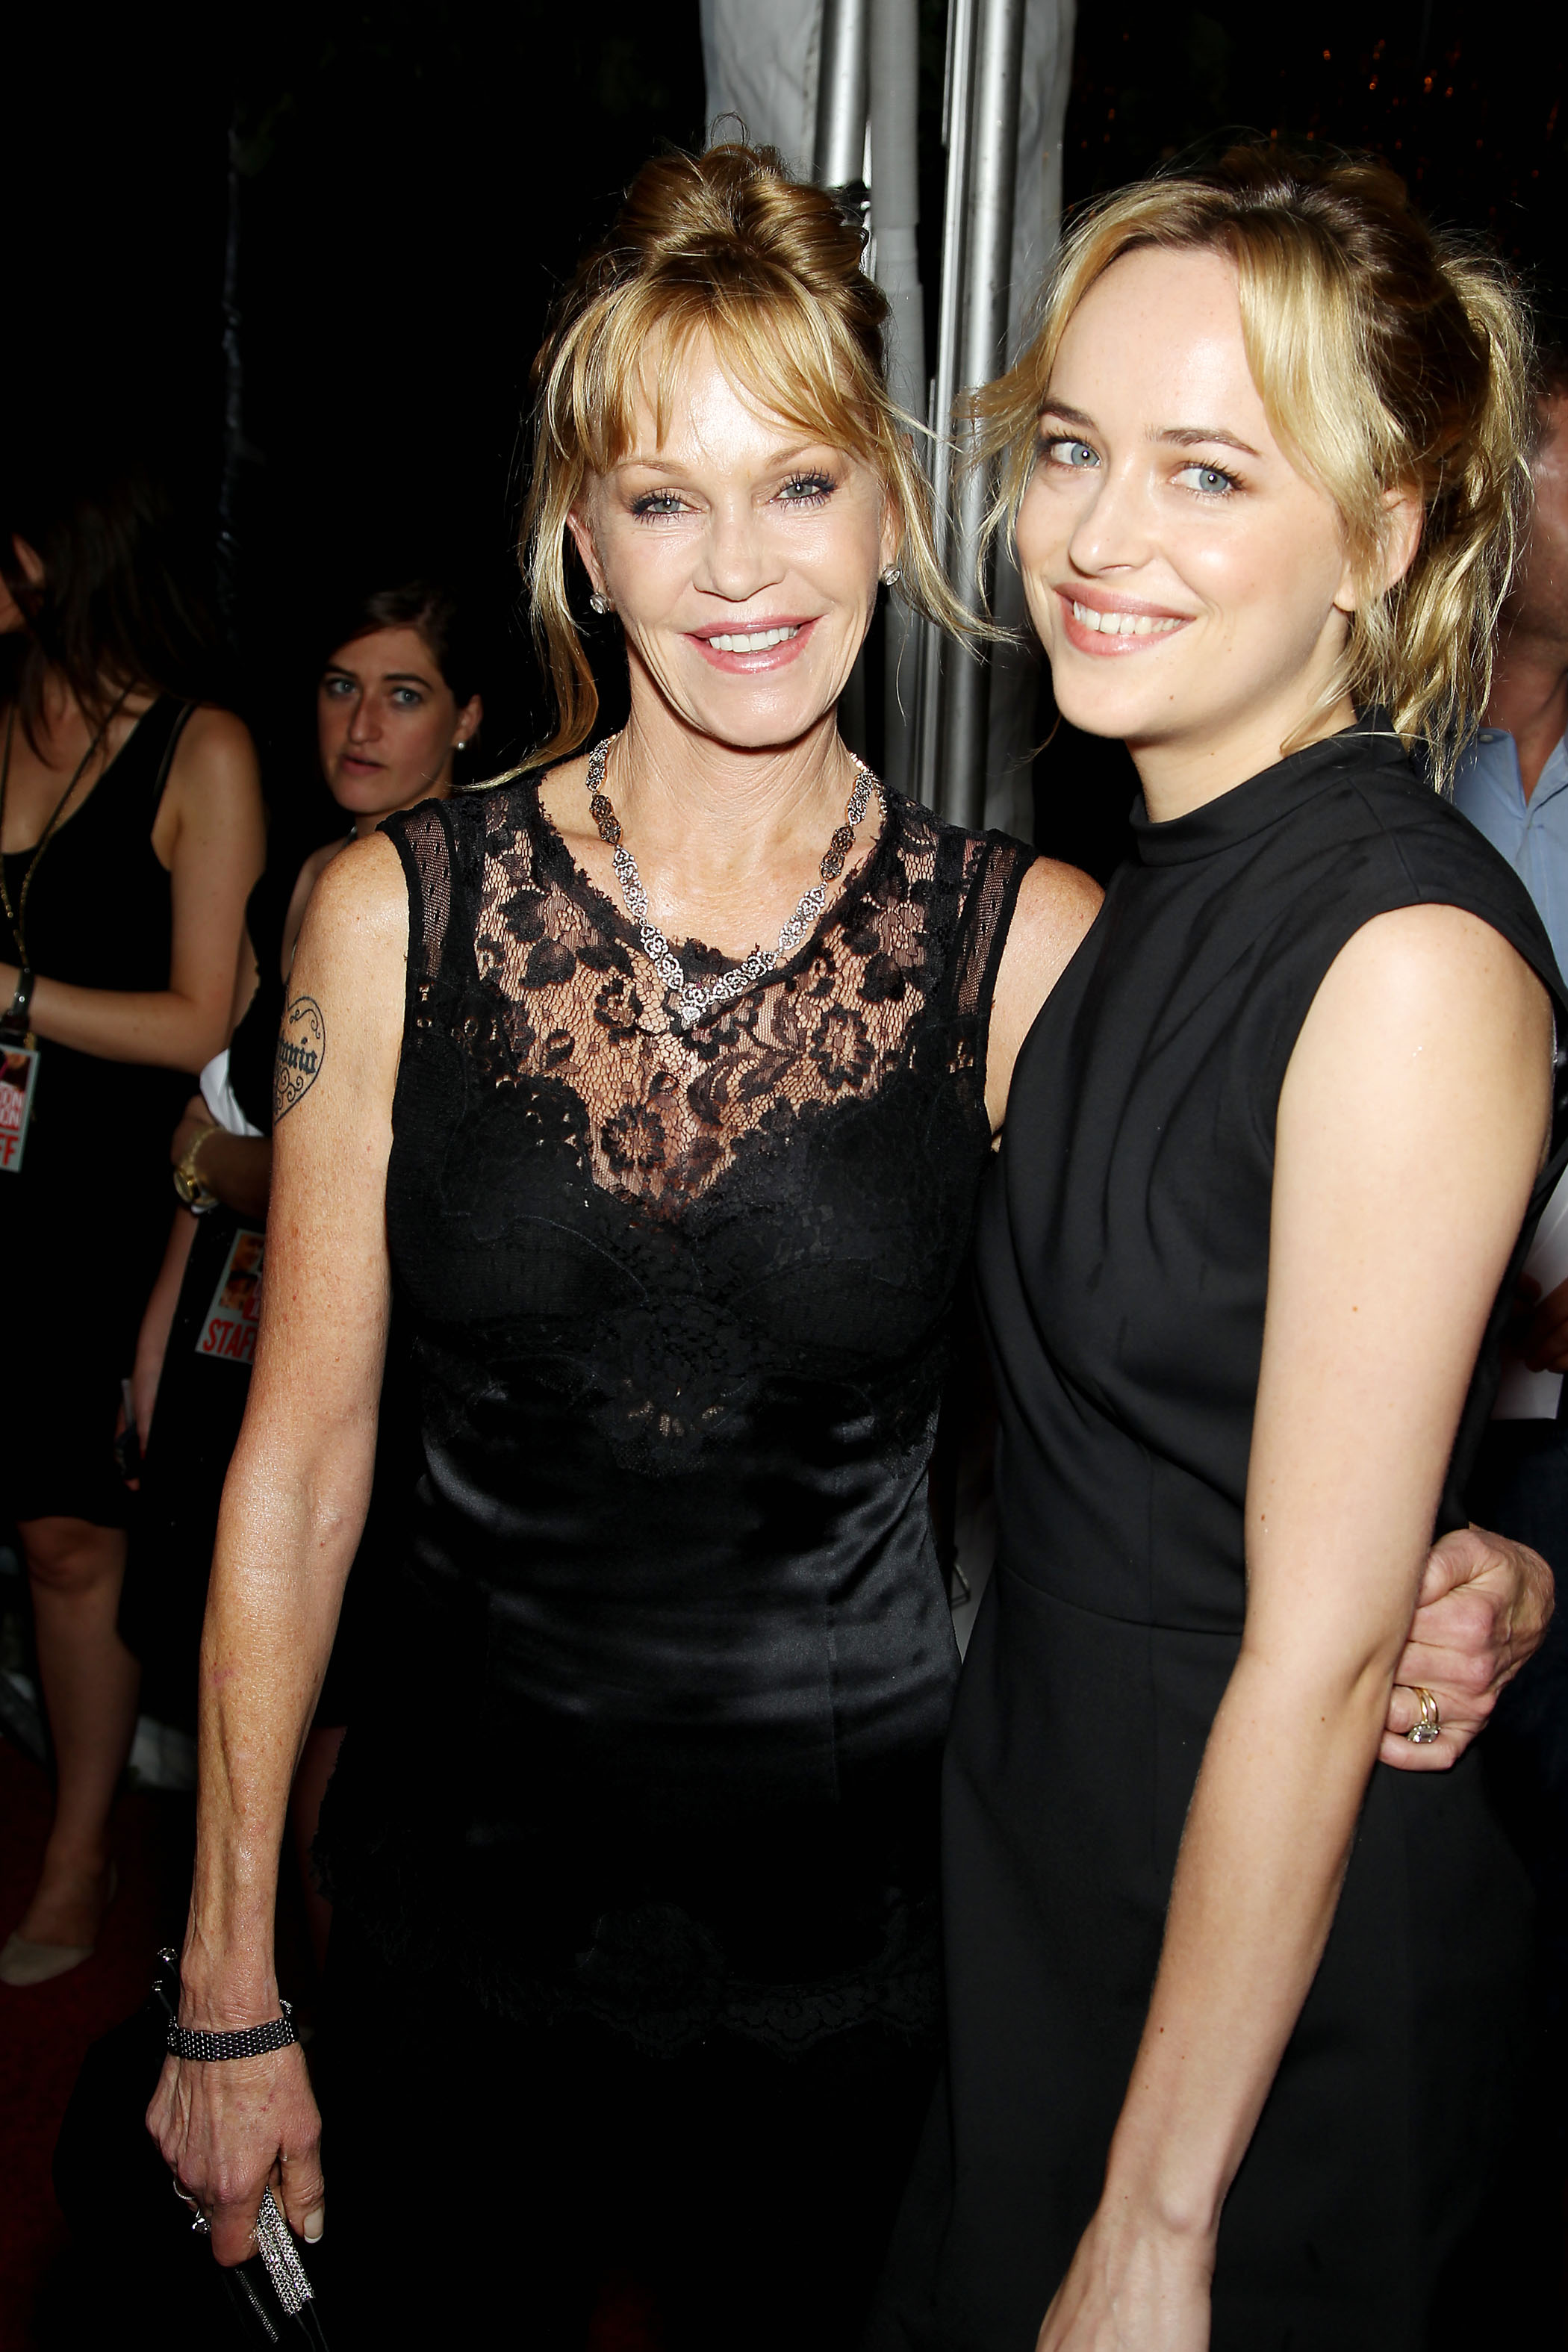 Melanie Griffith & Dakota Johnson - Relativity & Entertainment Weekly Presents the New York Premiere of "Don Jon" - After Party at the Boom Boom  - photo by startraksphoto.com